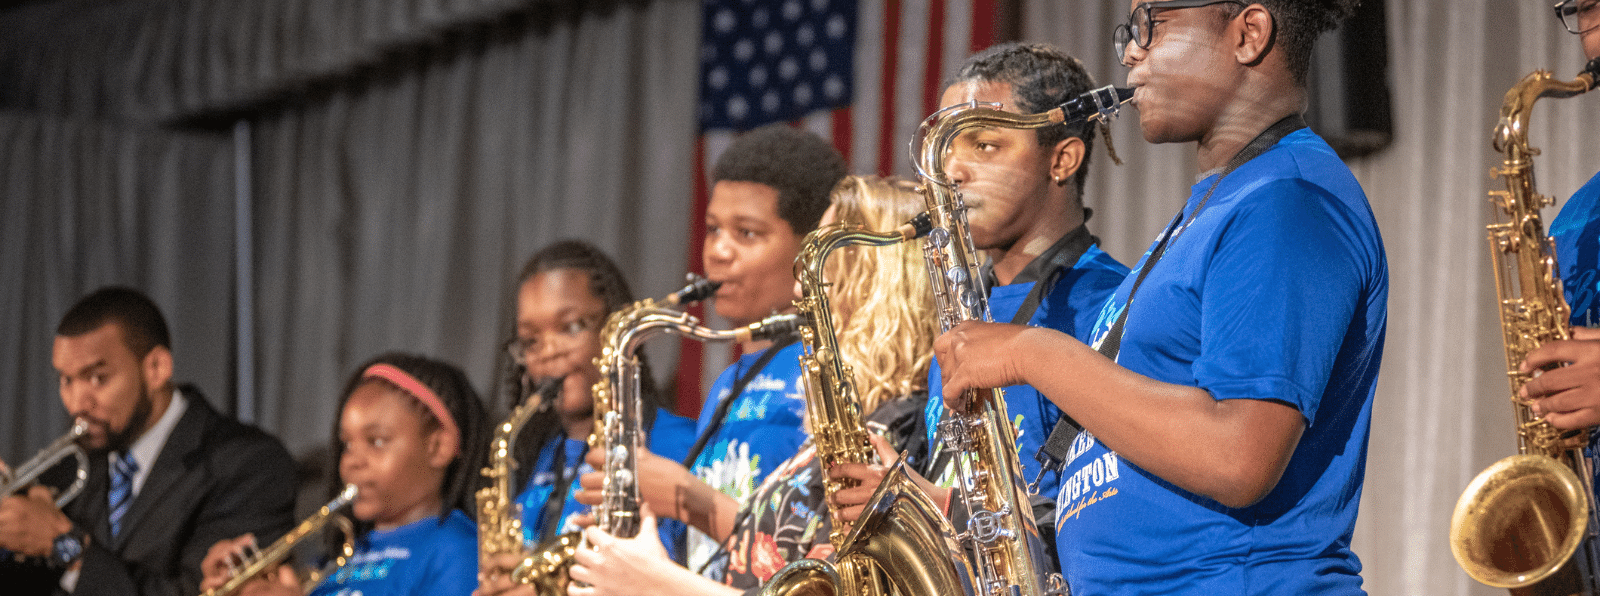 A row of youths play brass instruments on stage